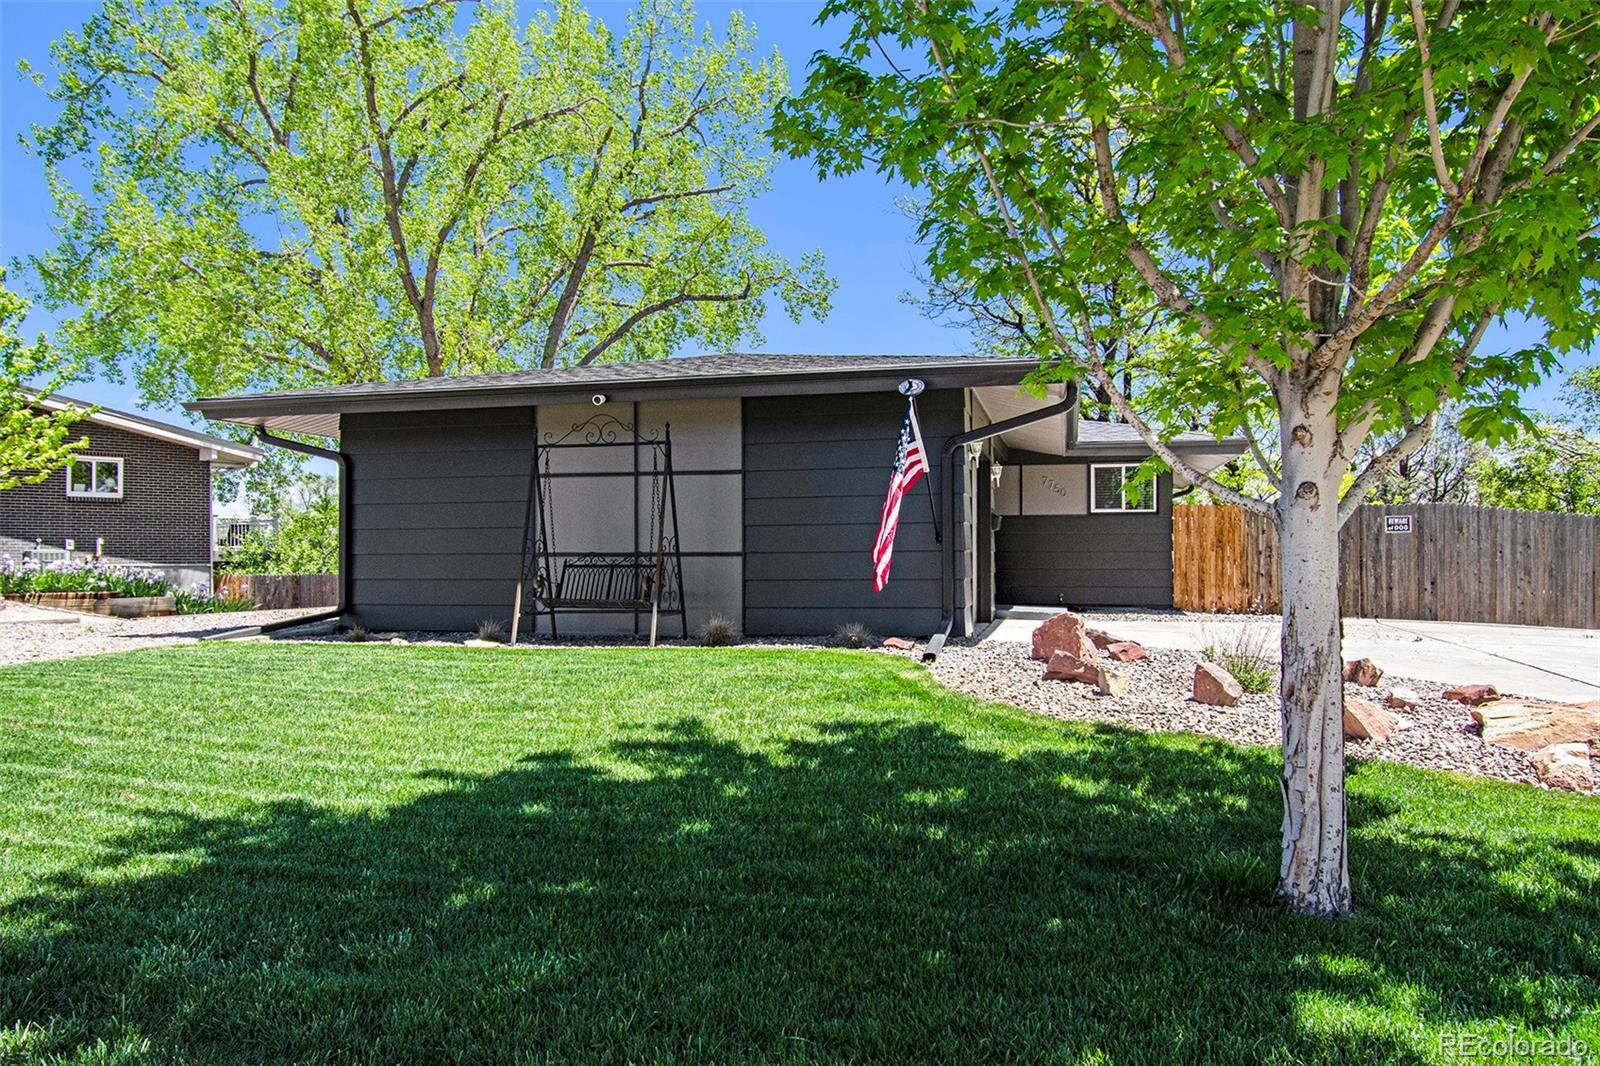 Report Image for 7750 S Sheridan Court,Littleton, Colorado